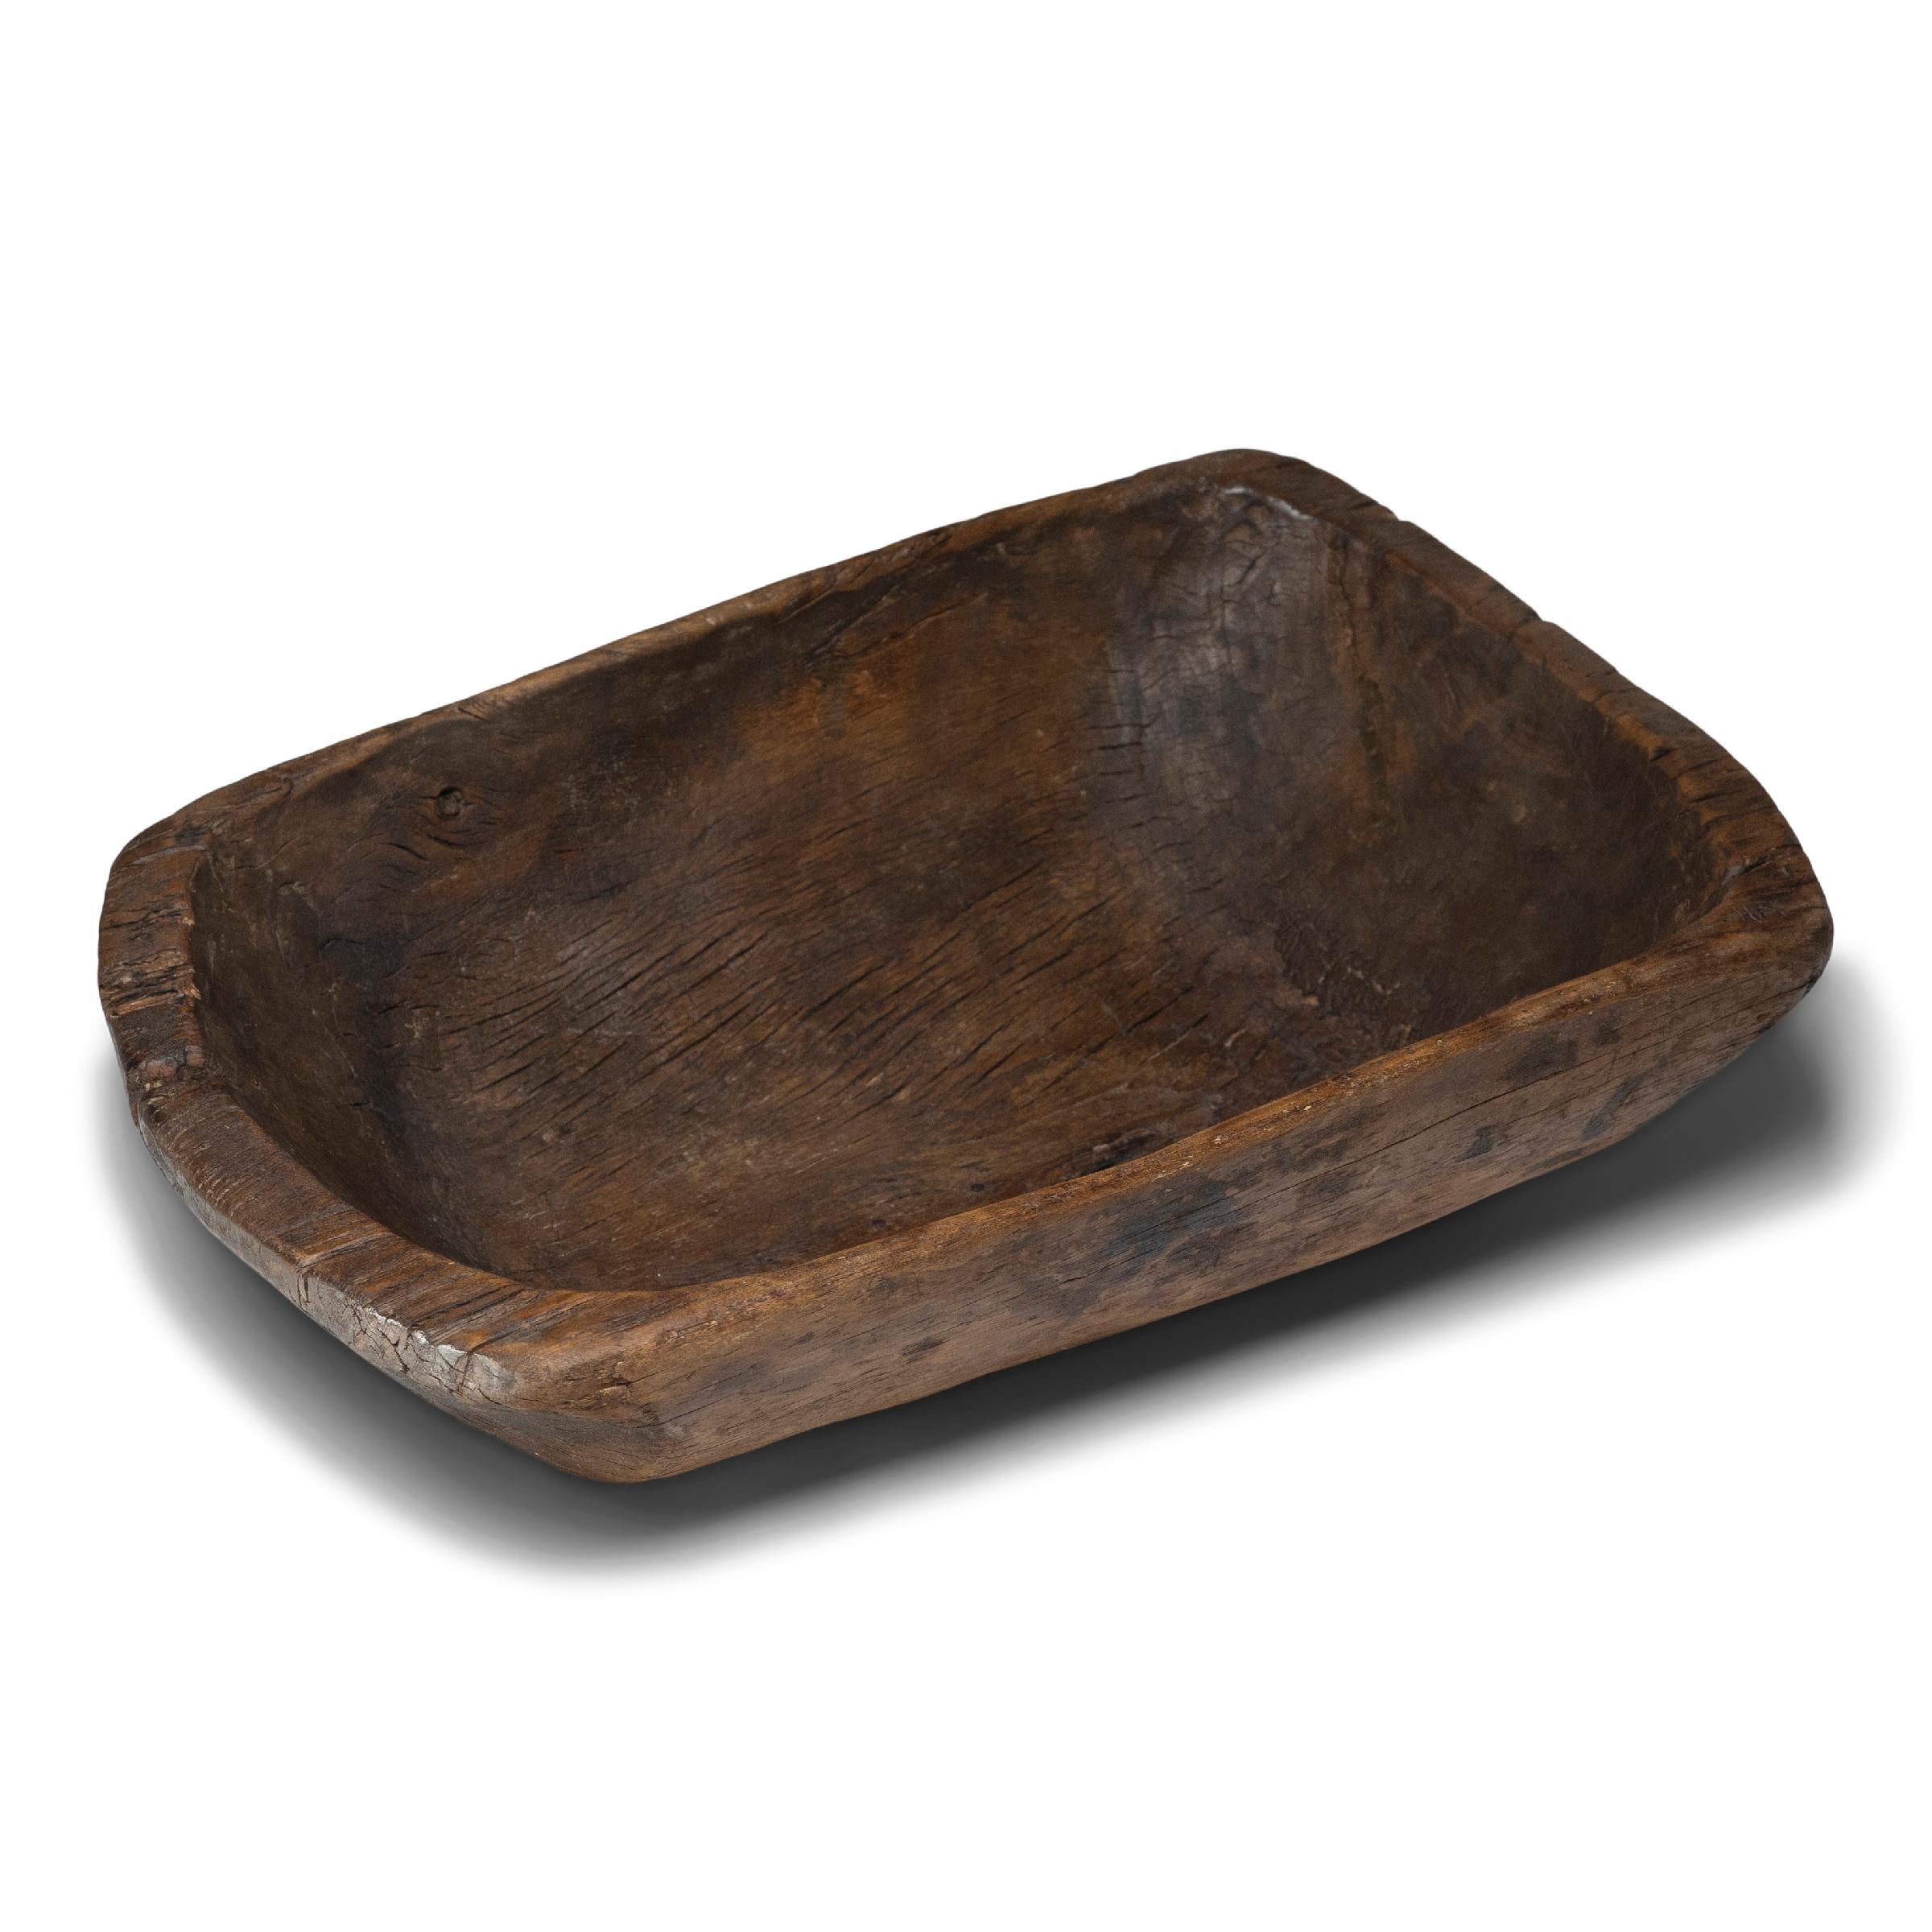 This large wooden farm tray from perfectly balances rustic texture with minimalist simplicity. Carved from a solid block of wood, the tray has a rectangular shape with rounded corners, sloping sides, and a deep interior basin. Years of use have